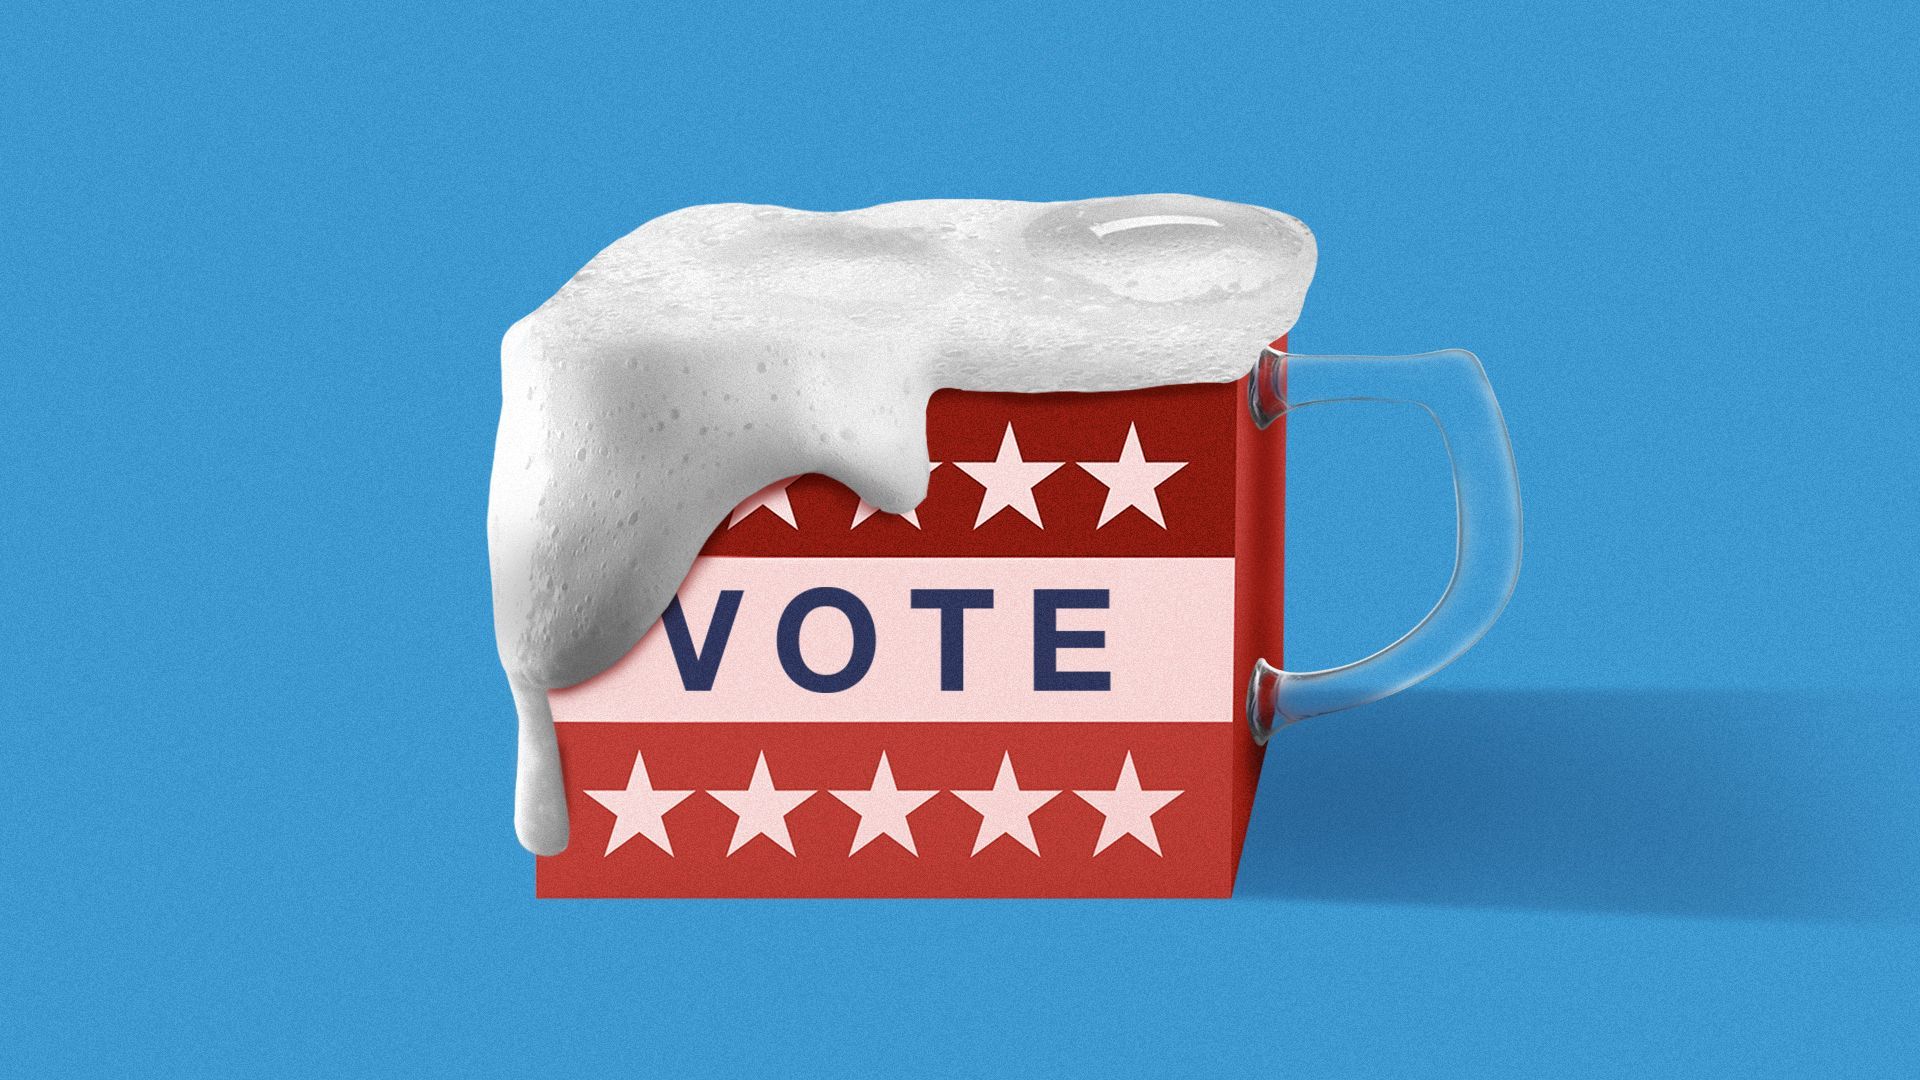 Illustration of a ballot box with beer foam and a mug handle.